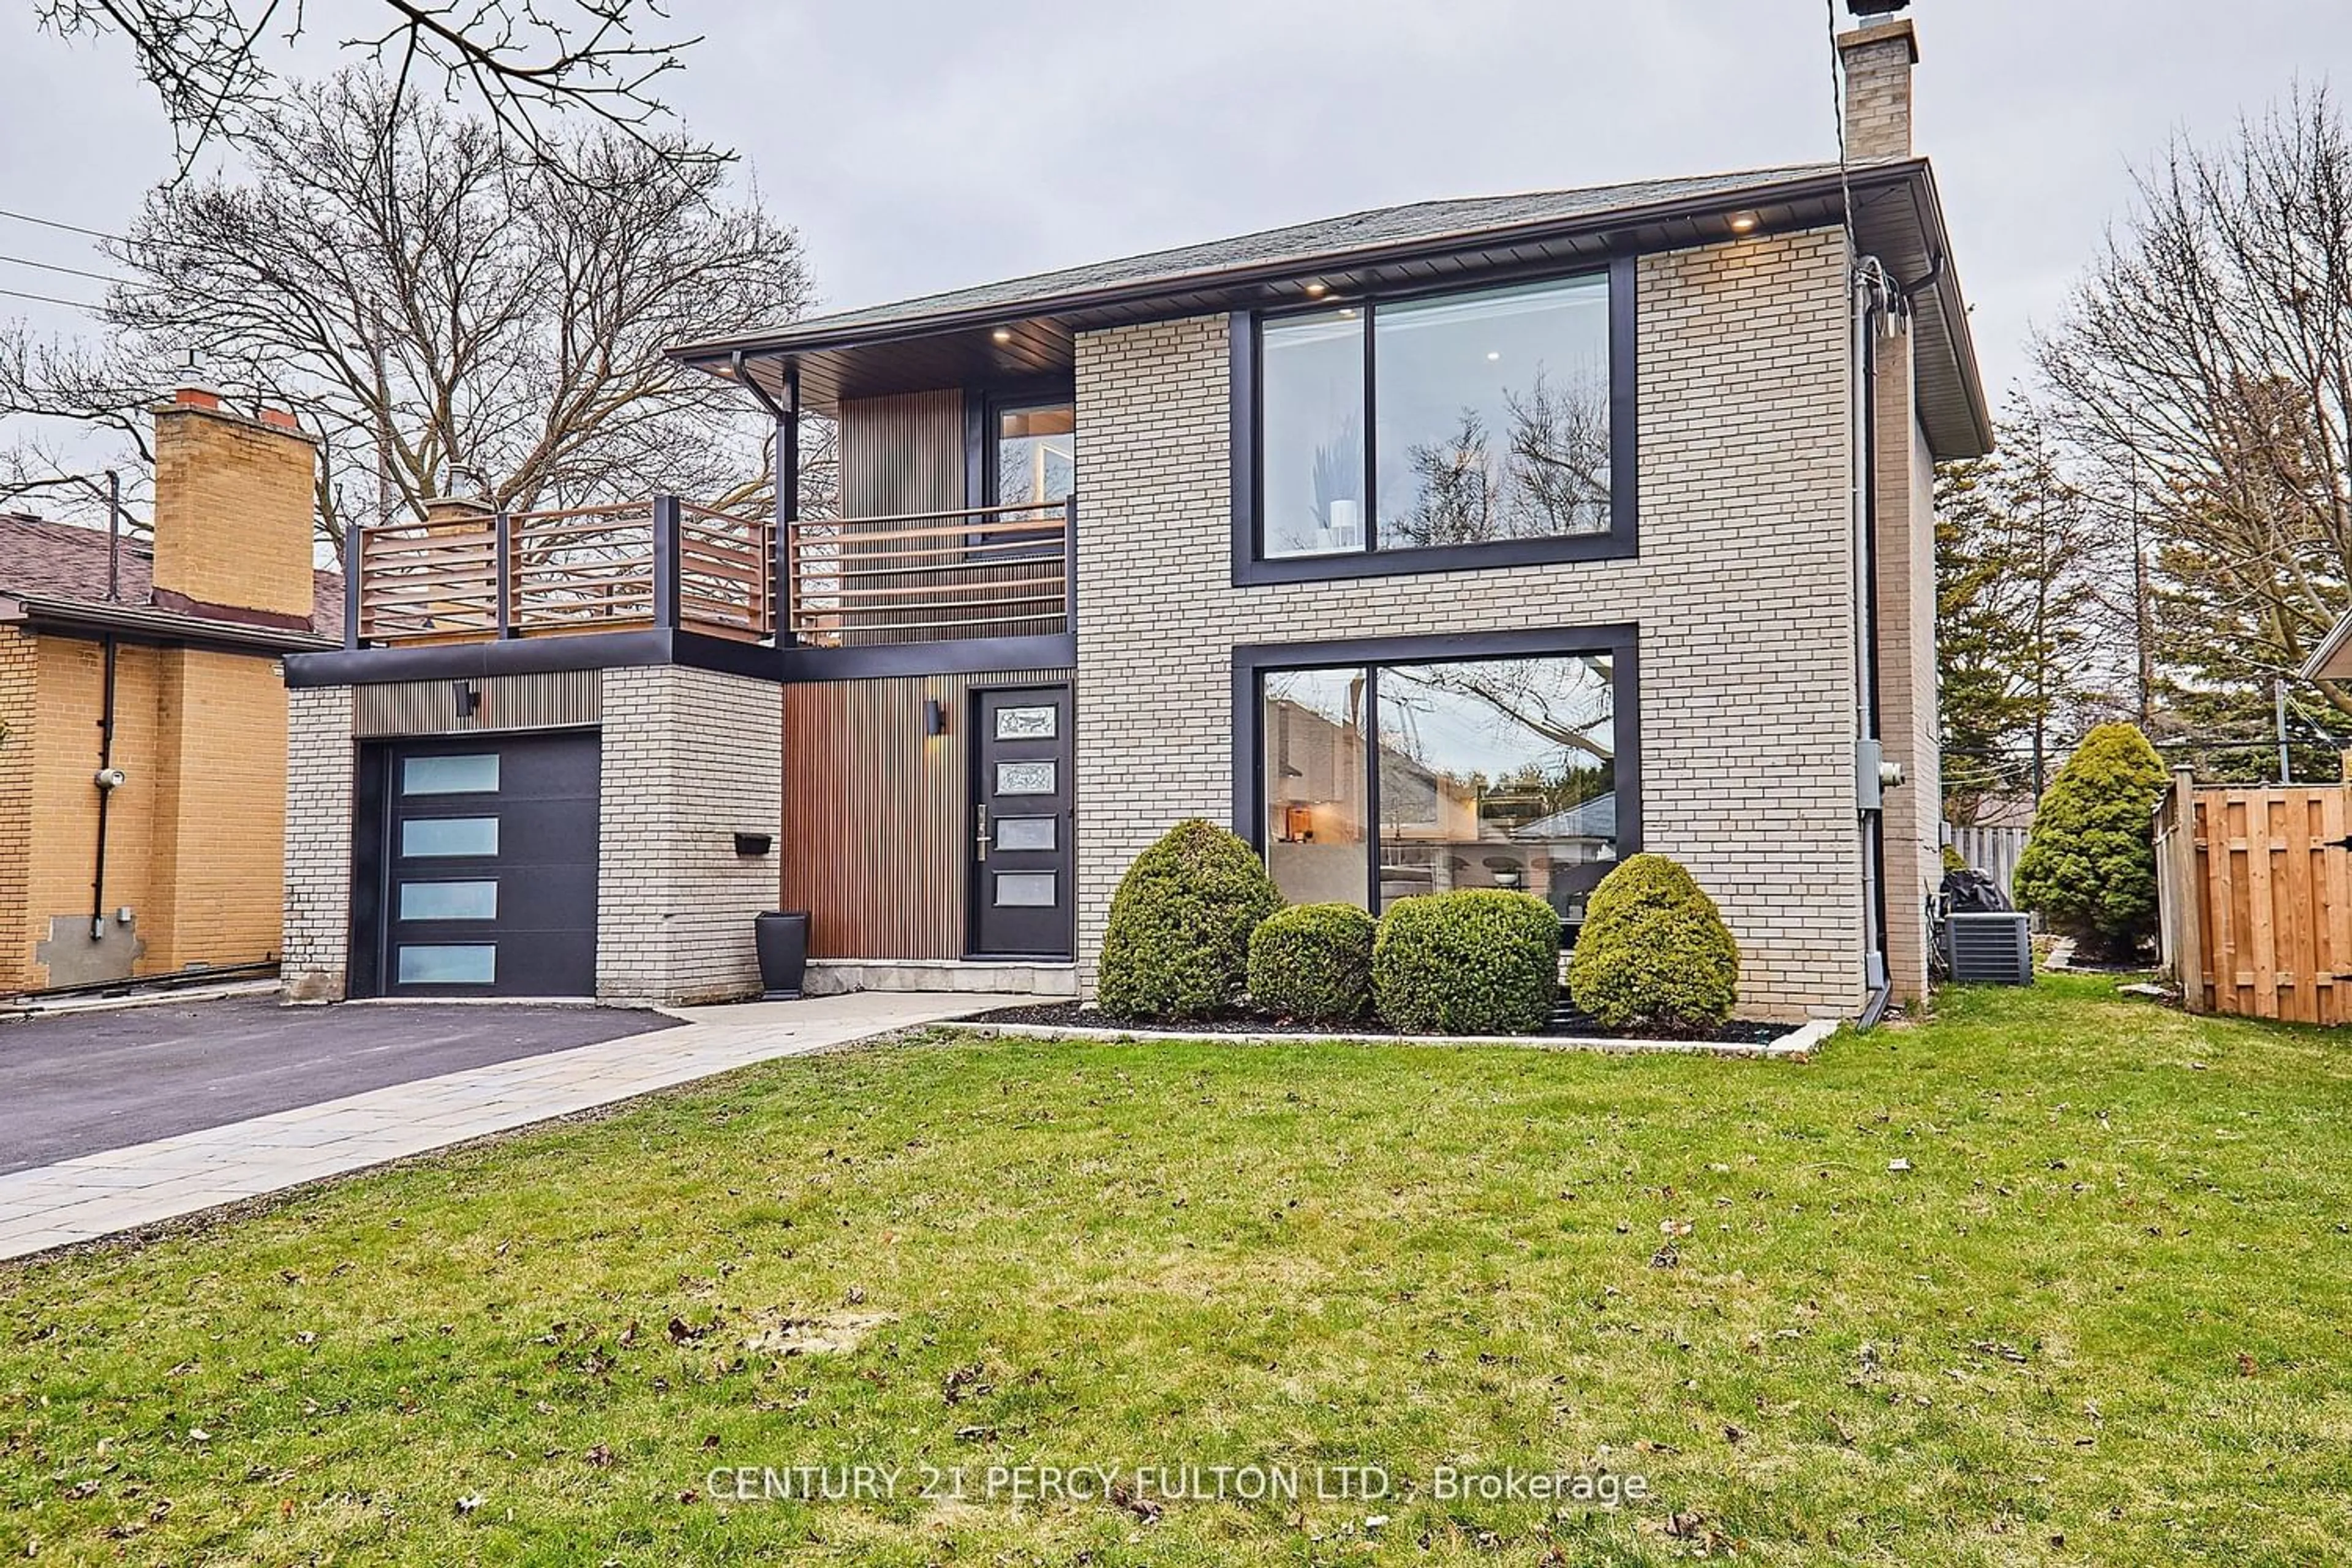 Home with brick exterior material for 40 Monarchwood Cres, Toronto Ontario M3A 1H4